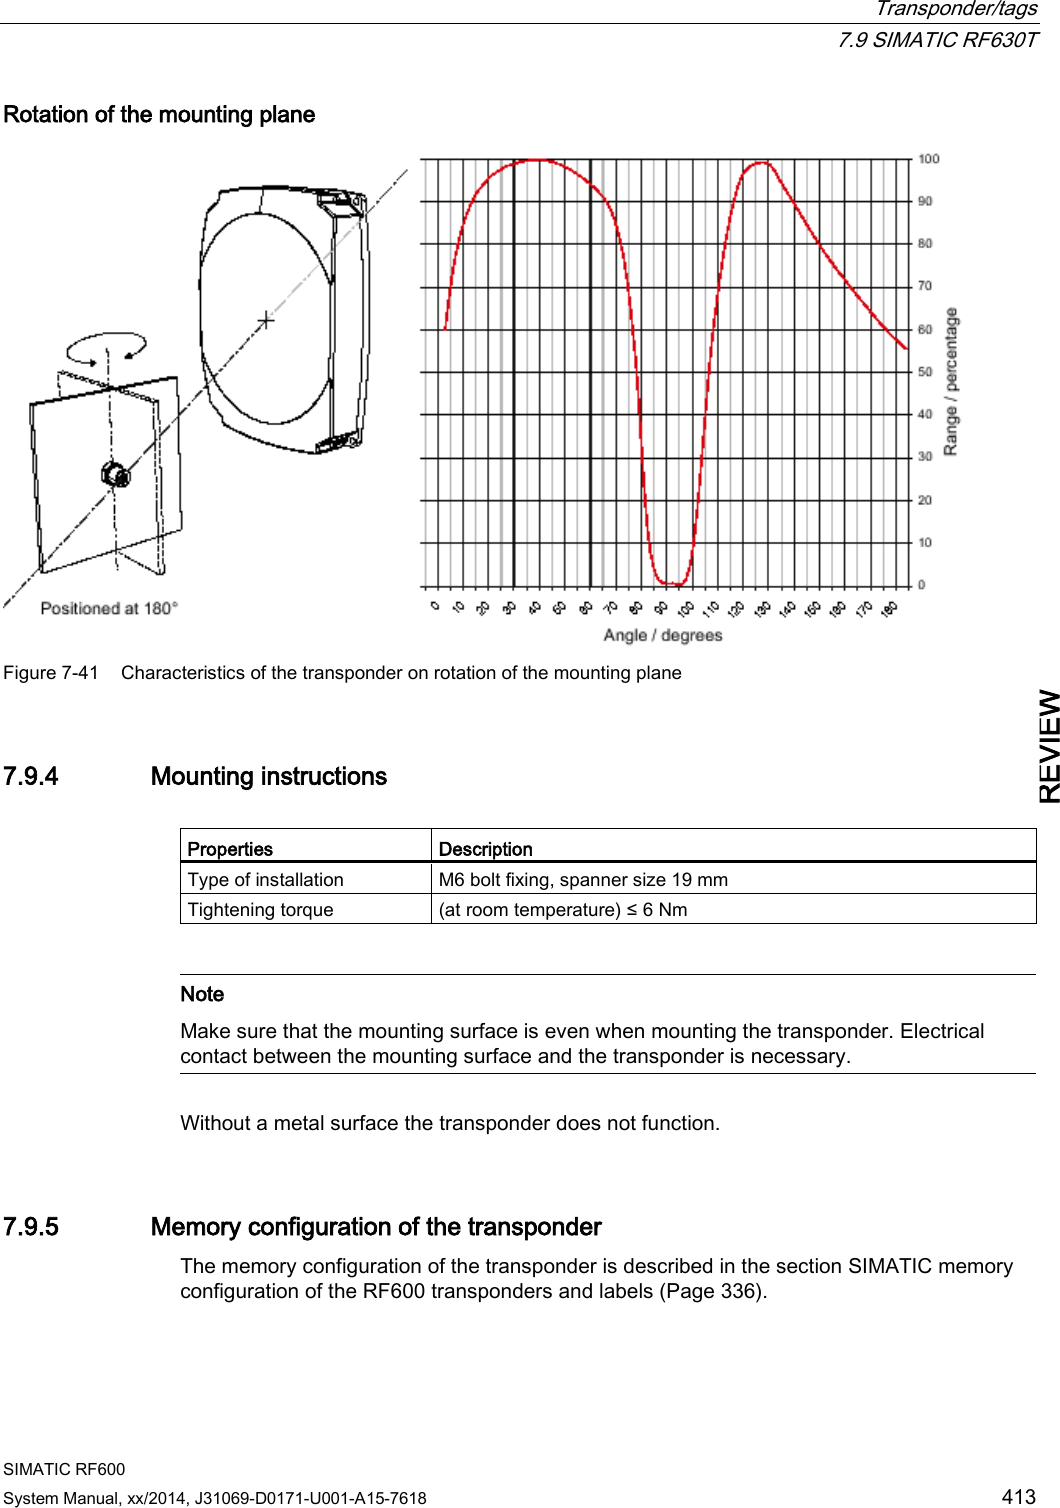  Transponder/tags  7.9 SIMATIC RF630T SIMATIC RF600 System Manual, xx/2014, J31069-D0171-U001-A15-7618 413 REVIEW Rotation of the mounting plane  Figure 7-41 Characteristics of the transponder on rotation of the mounting plane 7.9.4 Mounting instructions  Properties Description Type of installation M6 bolt fixing, spanner size 19 mm Tightening torque (at room temperature) ≤ 6 Nm    Note Make sure that the mounting surface is even when mounting the transponder. Electrical contact between the mounting surface and the transponder is necessary.  Without a metal surface the transponder does not function. 7.9.5 Memory configuration of the transponder The memory configuration of the transponder is described in the section SIMATIC memory configuration of the RF600 transponders and labels (Page 336). 